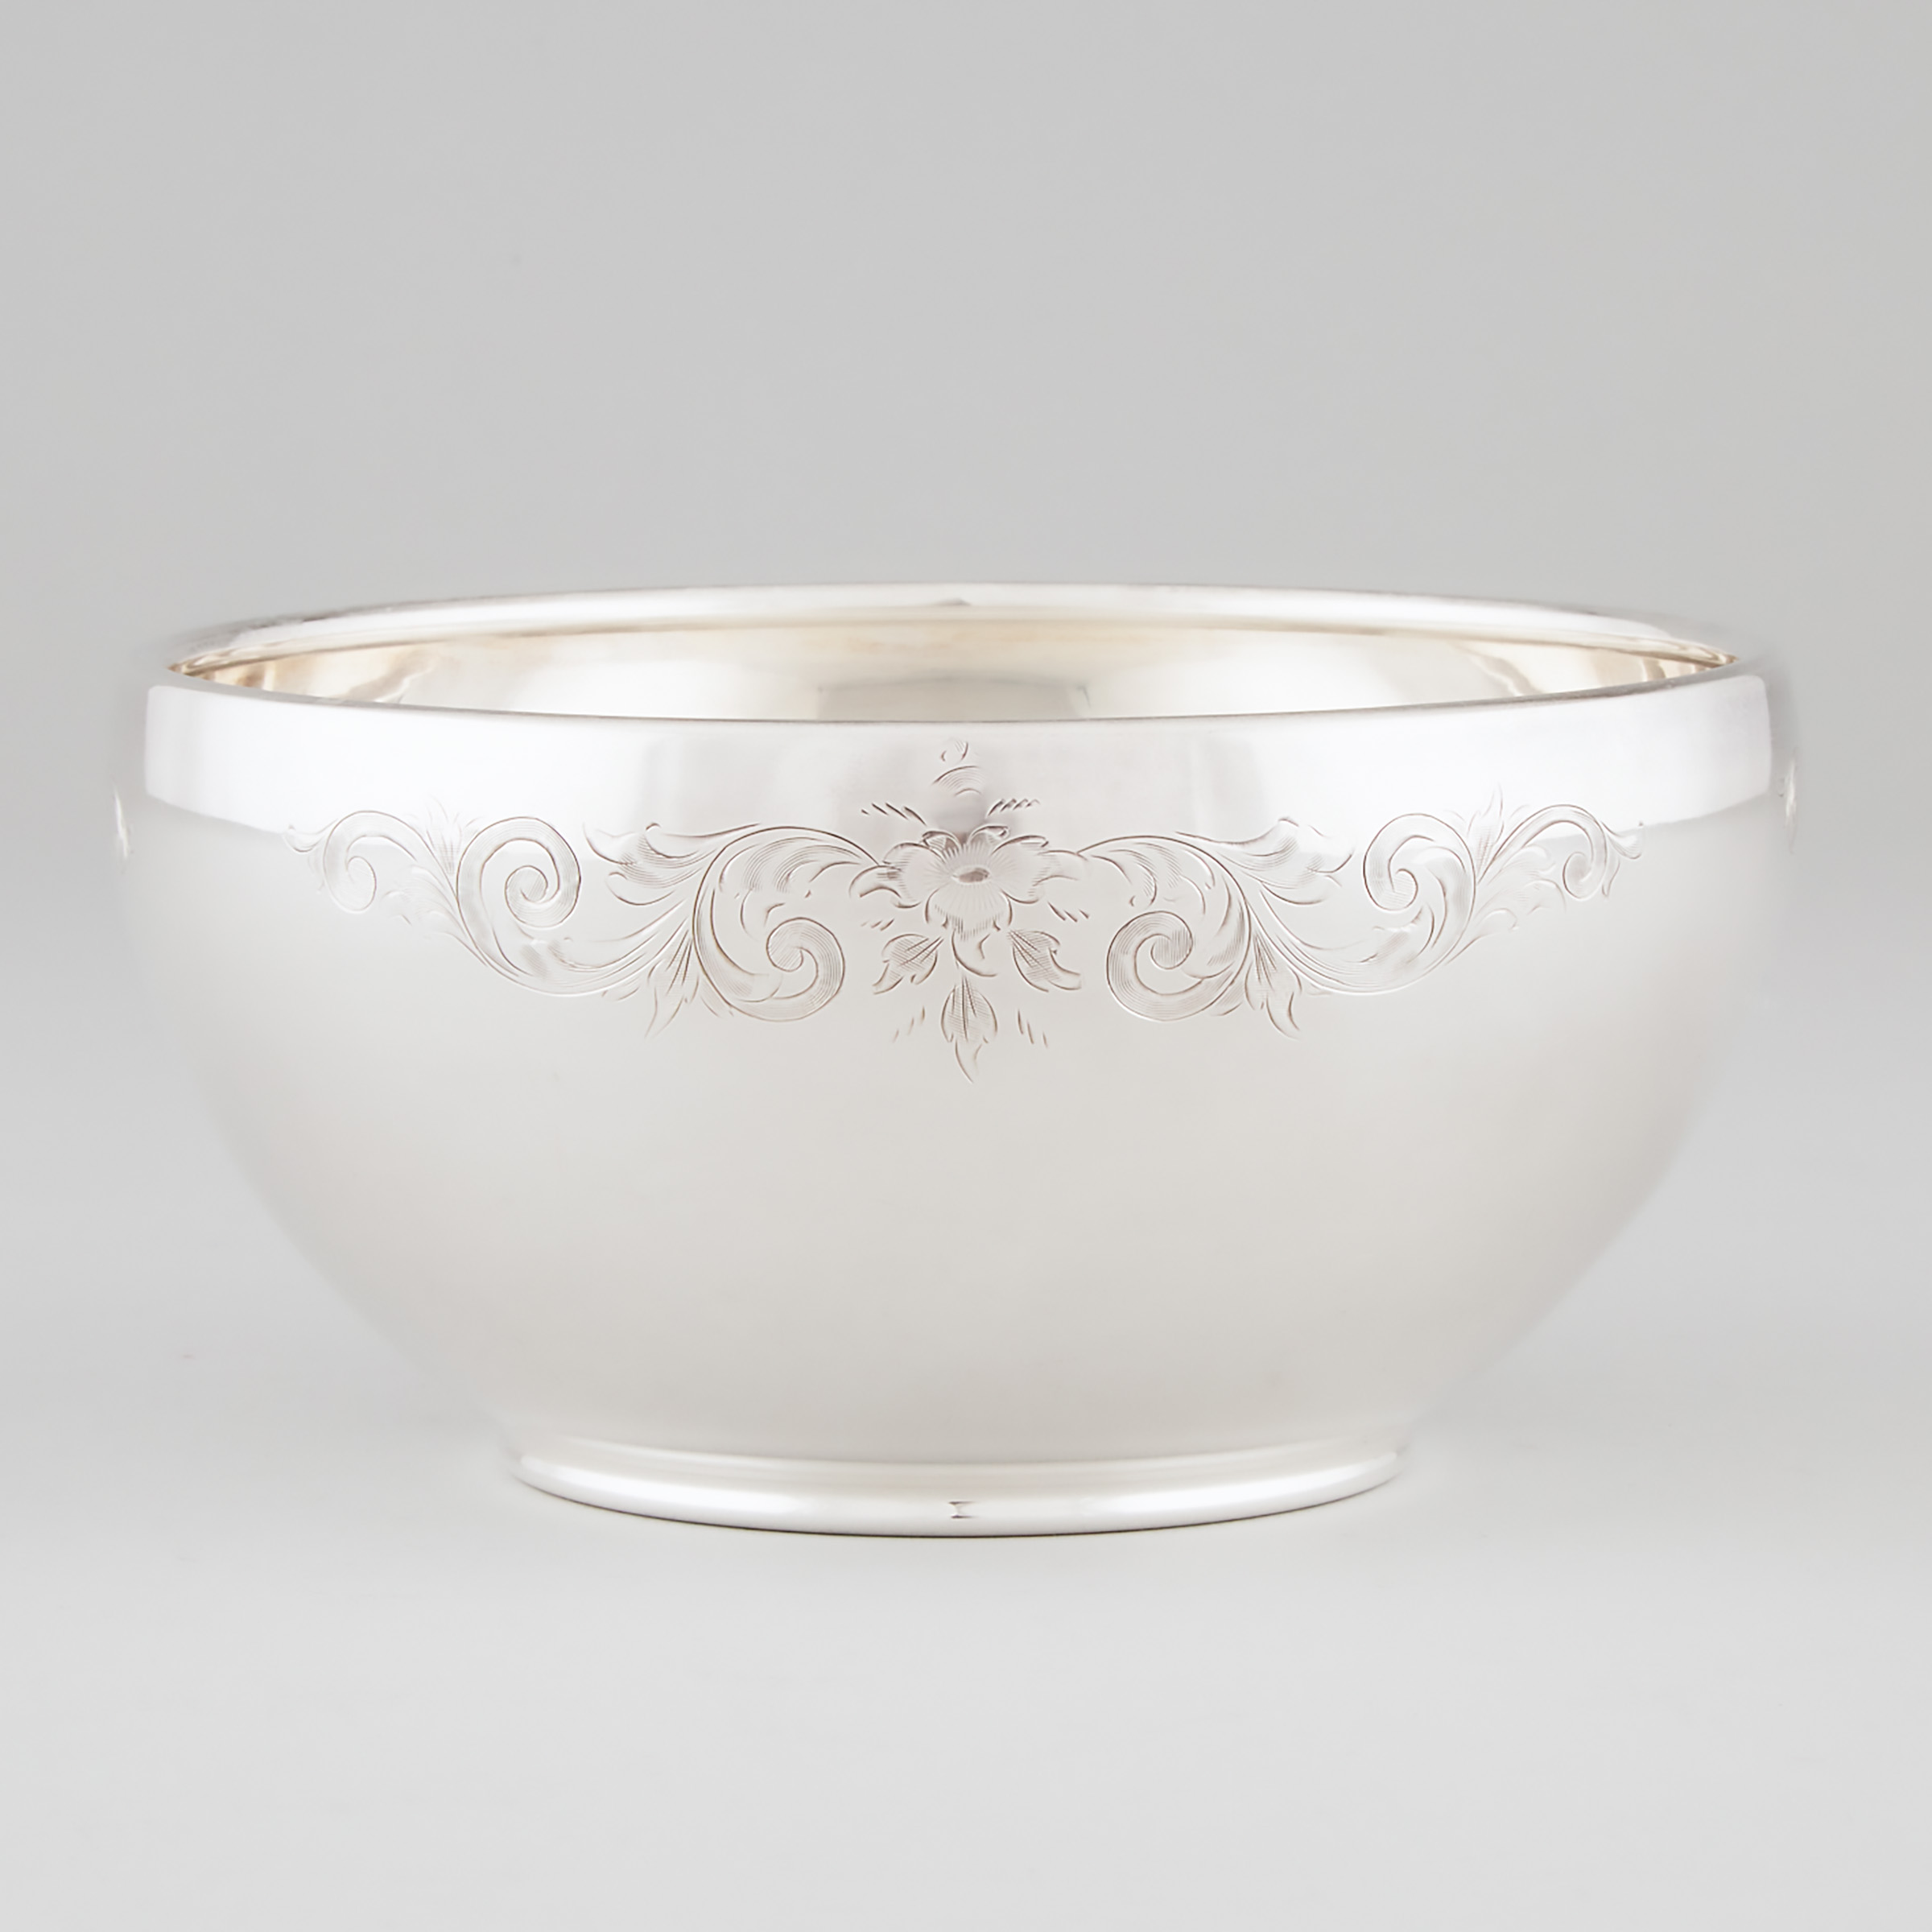 Canadian Silver Bowl, Henry Birks & Sons, Montreal, Que., 1947